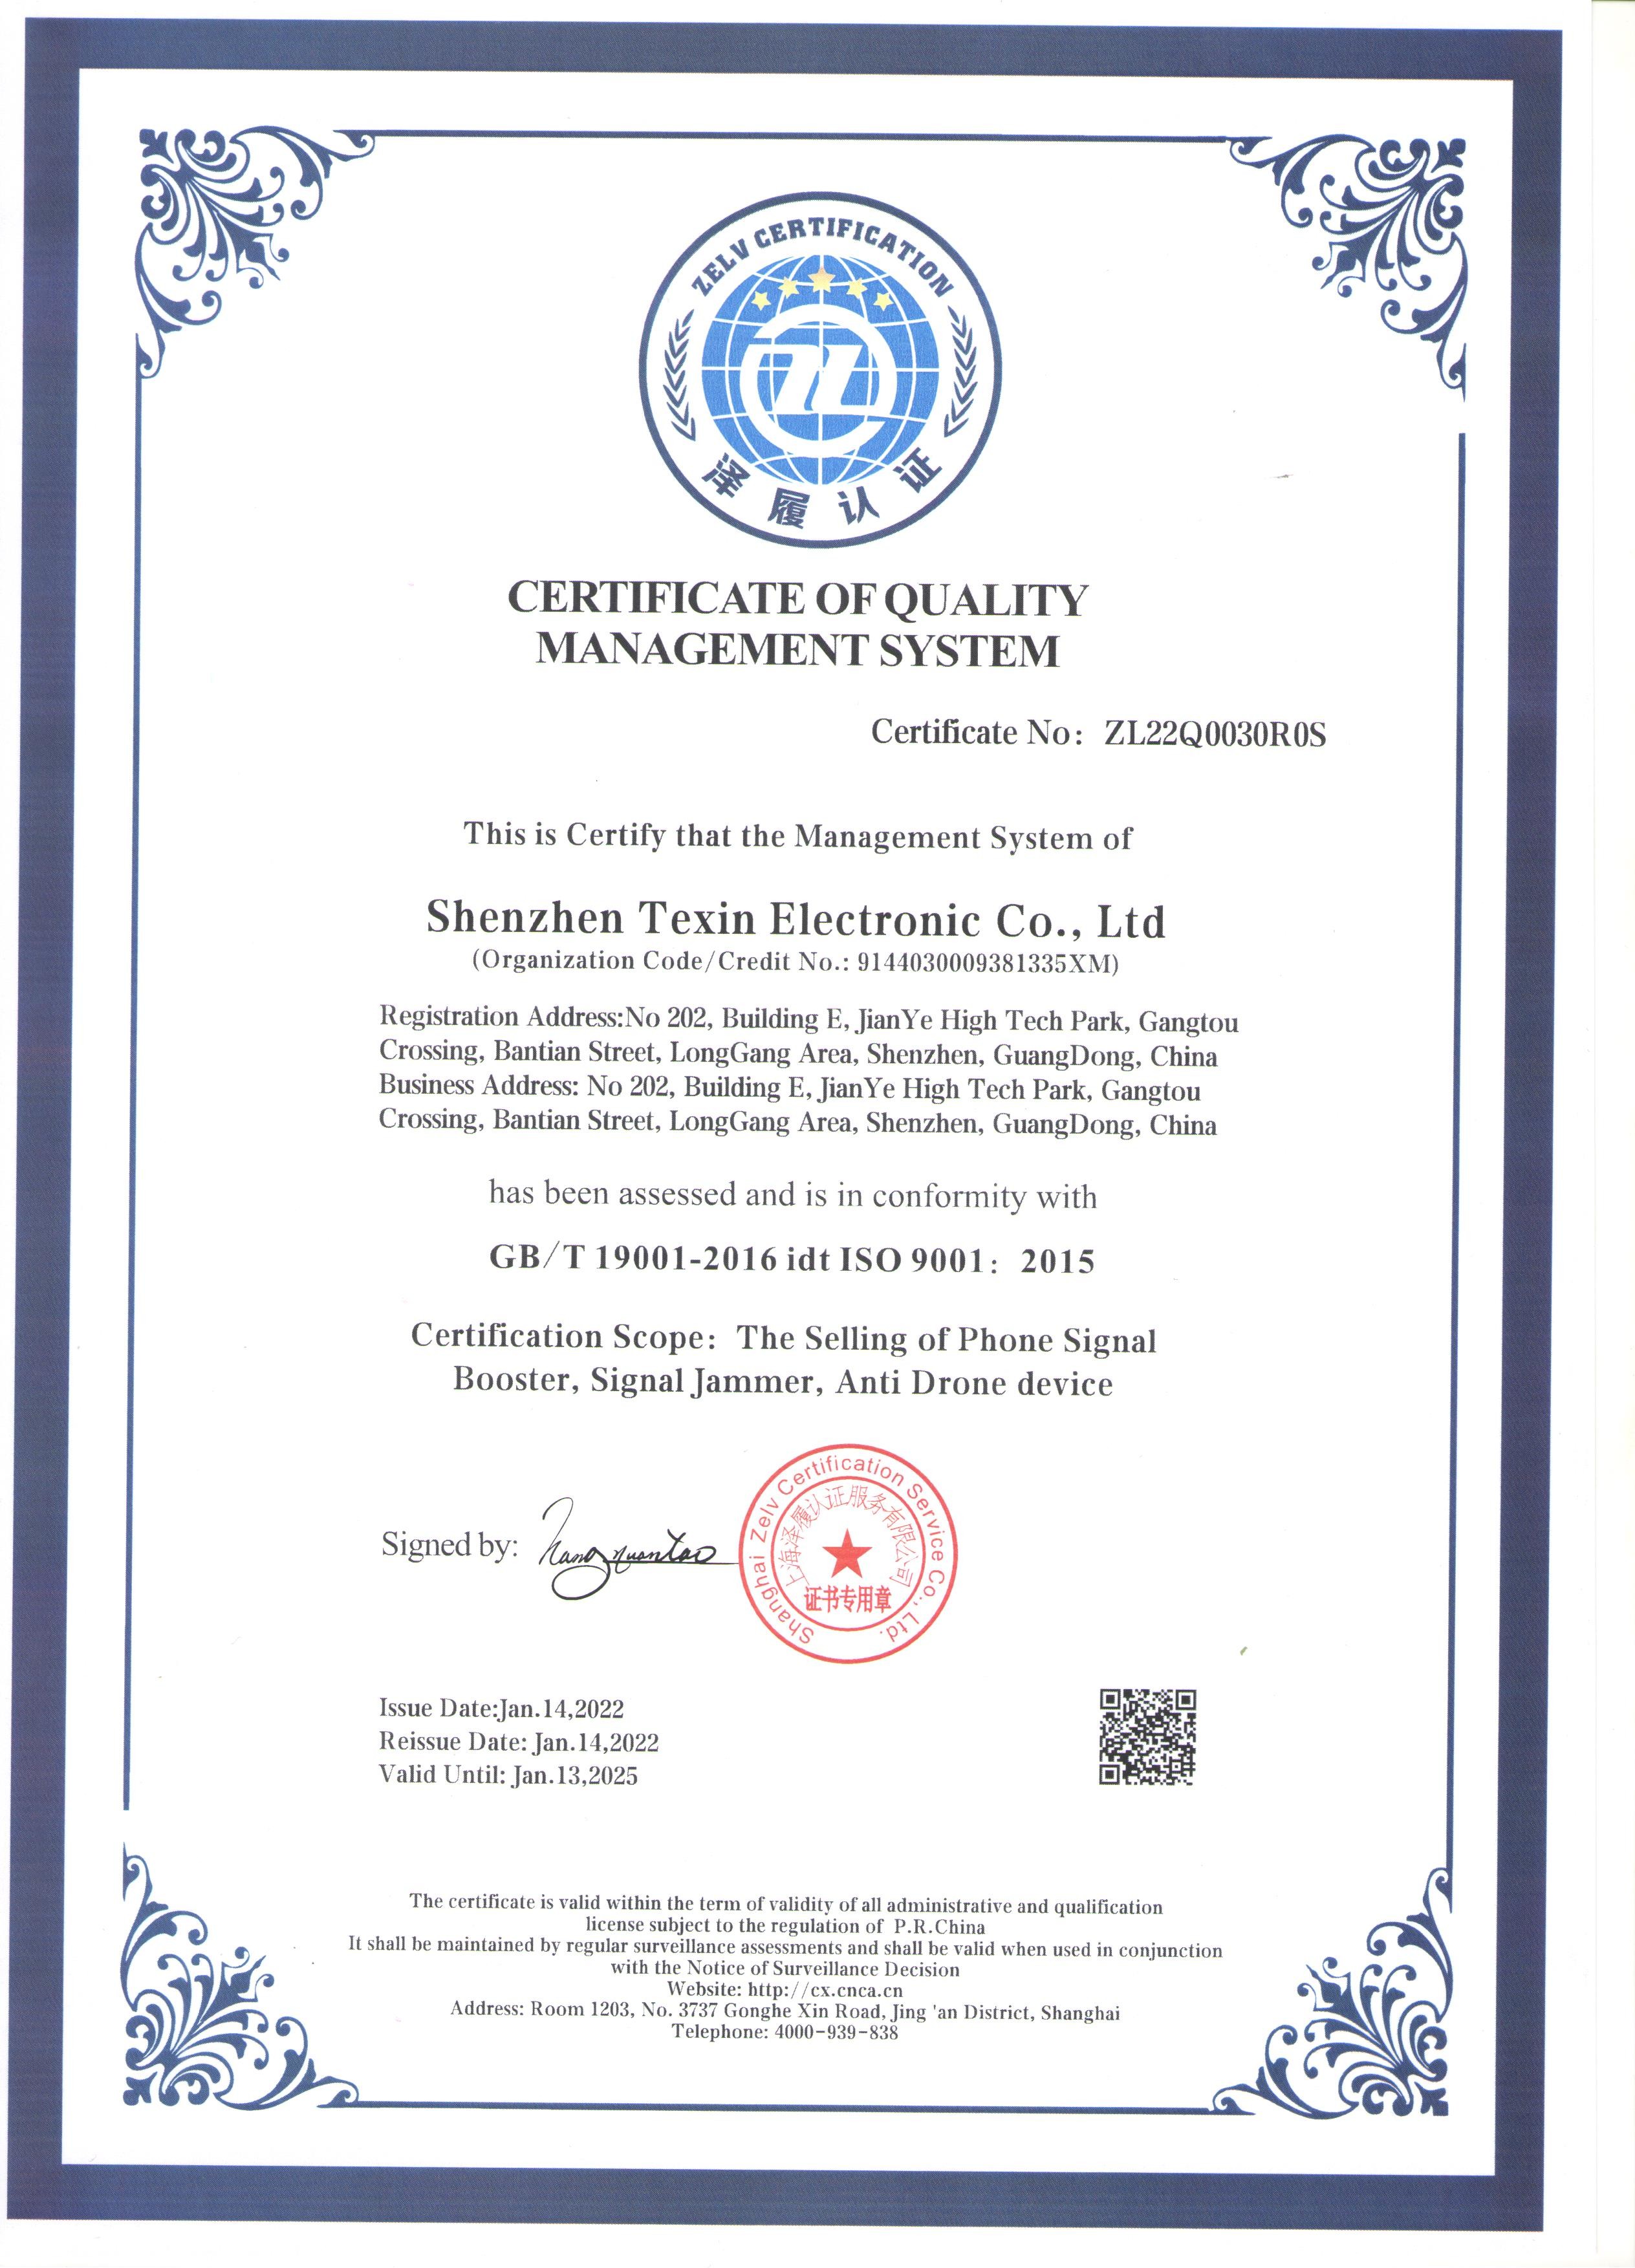 Shenzhen TeXin electronic Co., Limited Certifications